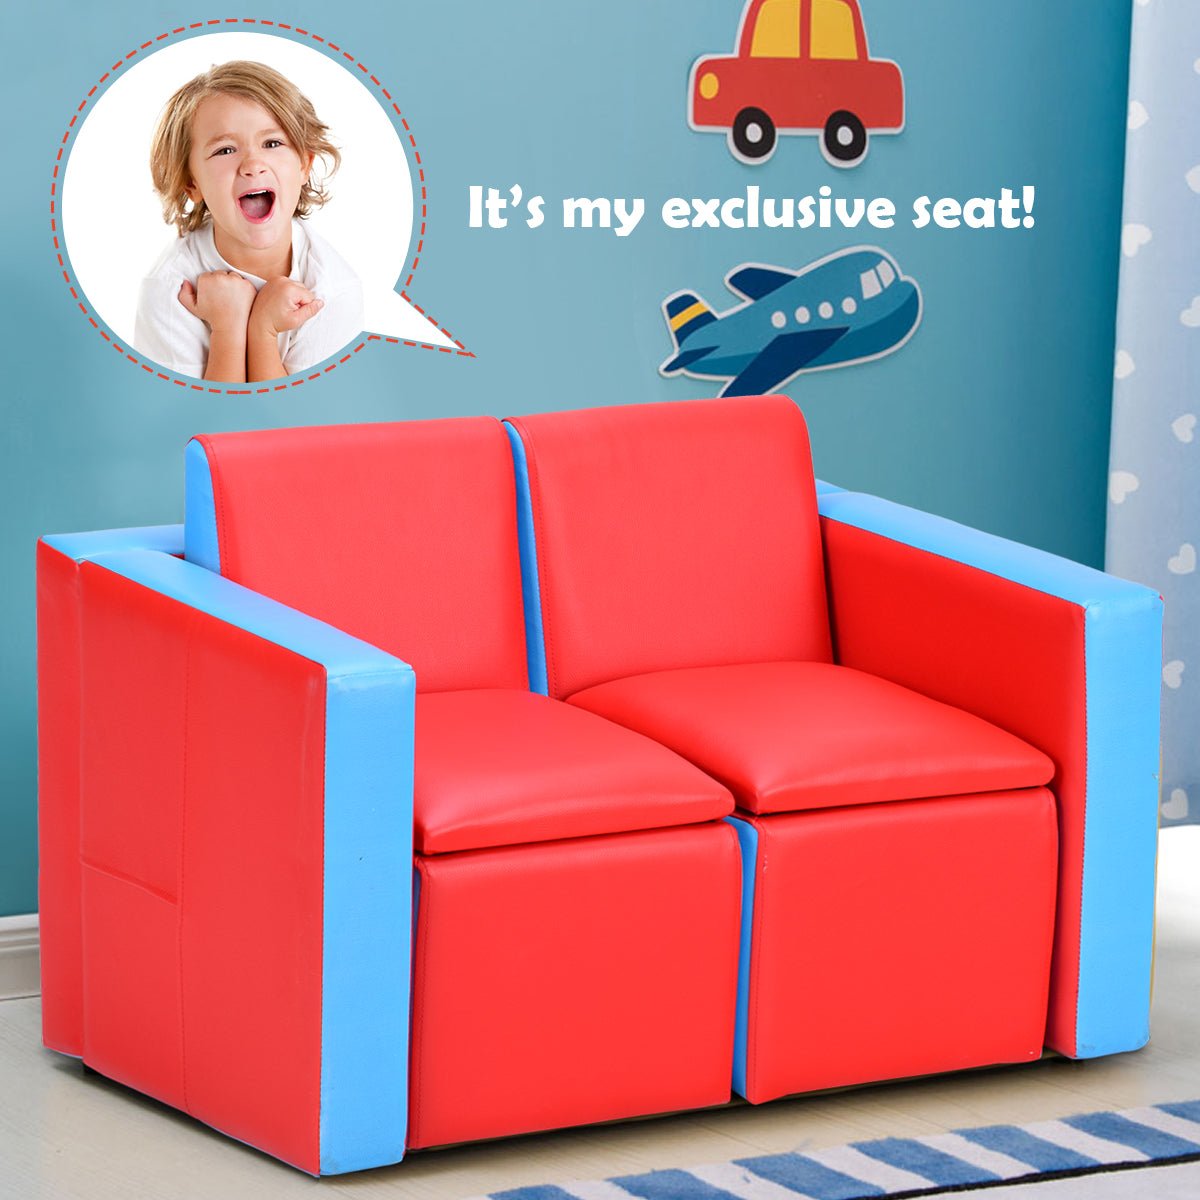 12-in-1 Kids Sofa with Storage Space and Wooden Frame - Comfy and Organized